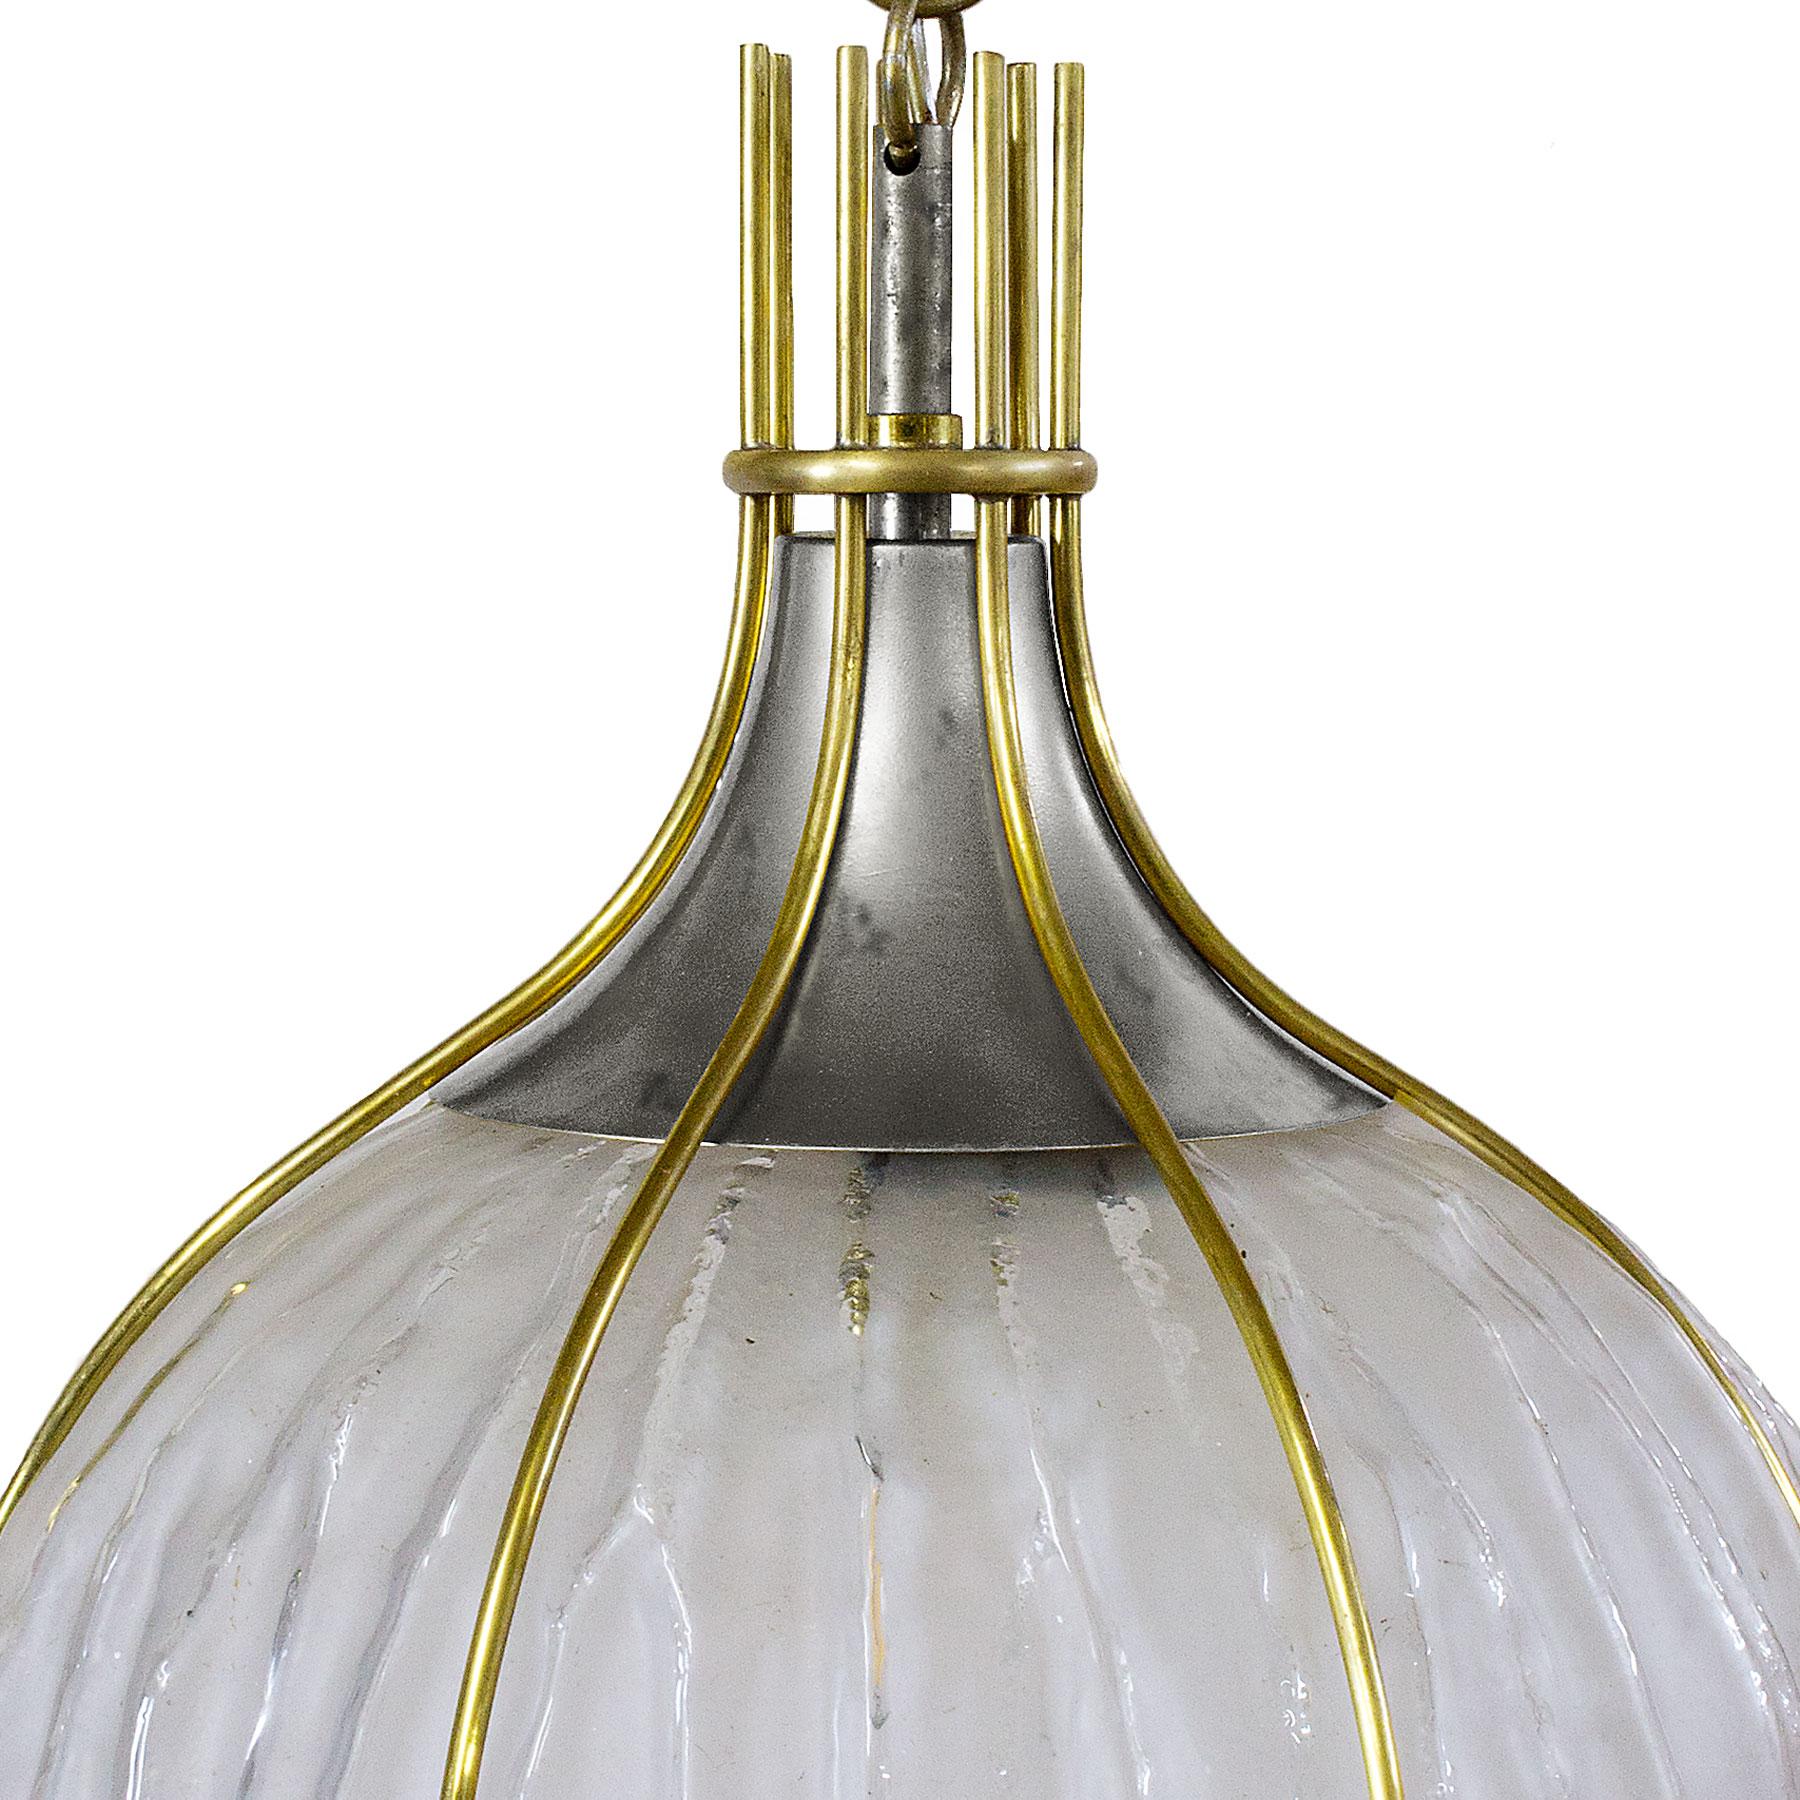 Mid-20th Century Mid-Century Modern Hanging Lantern by Esperia, Acid Etched Glass Ball - Italy For Sale